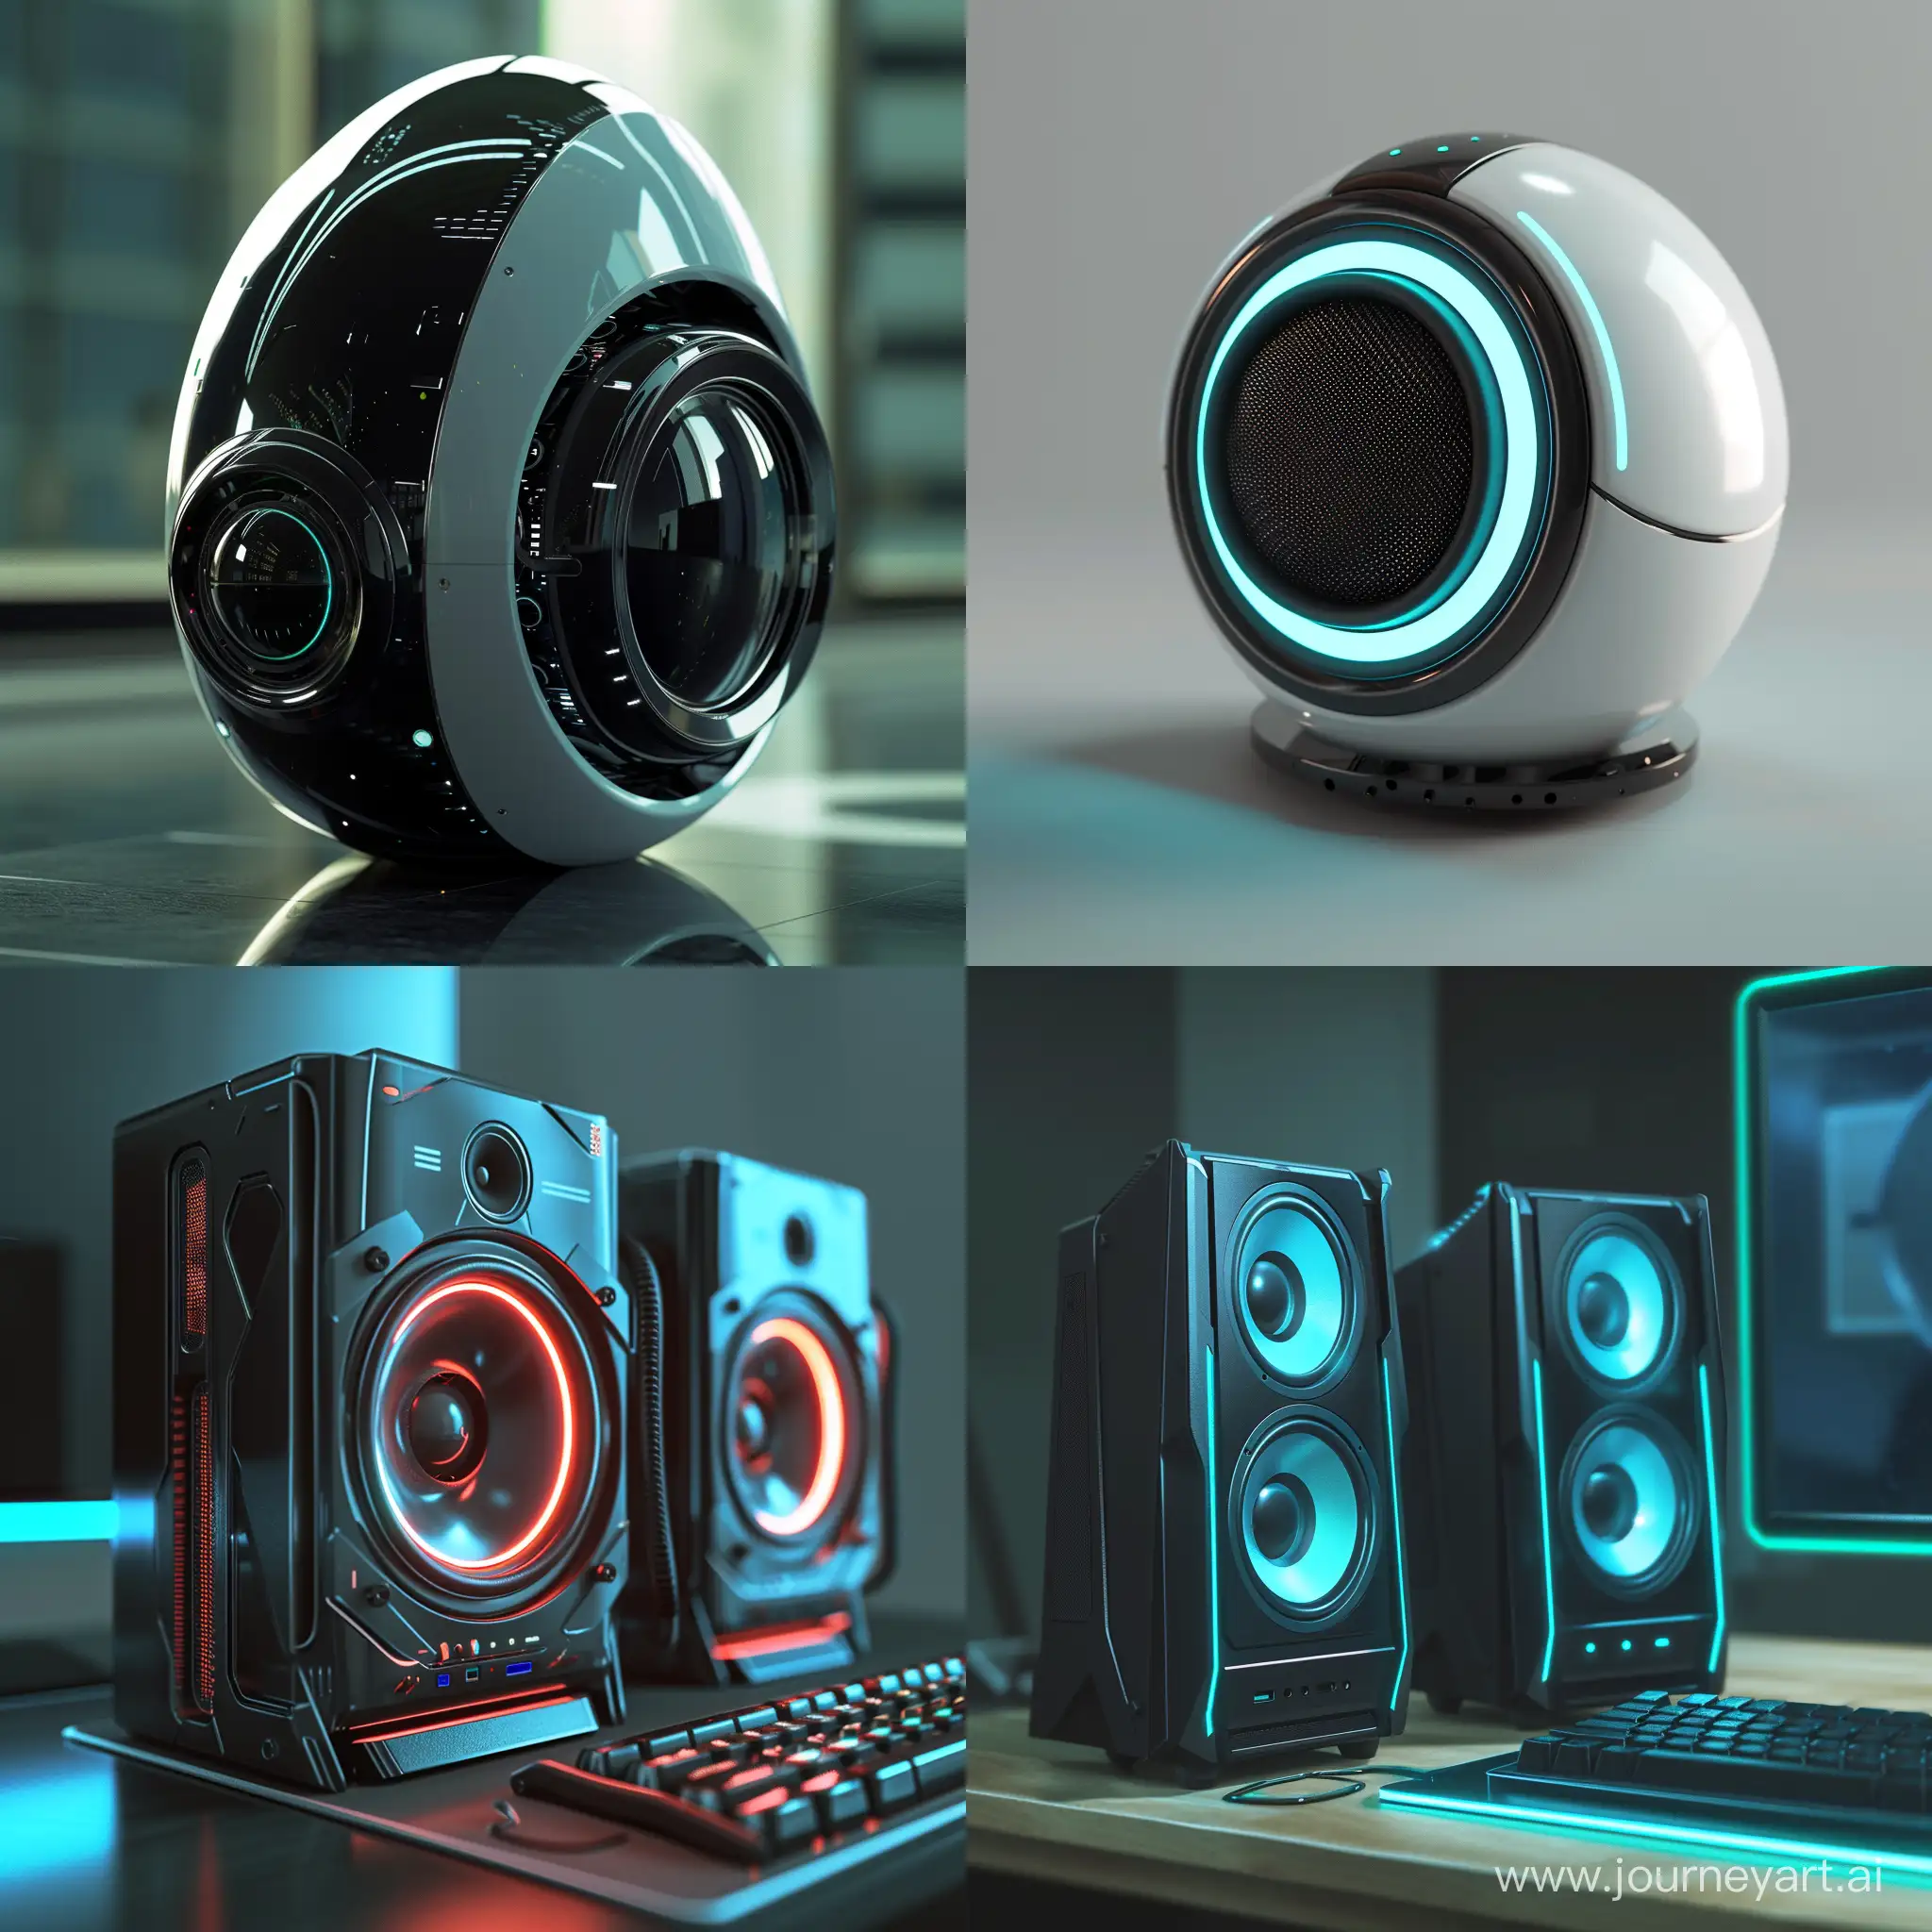 Futuristic-PC-Speakers-in-Cinematic-Style-HighTech-Audio-Experience